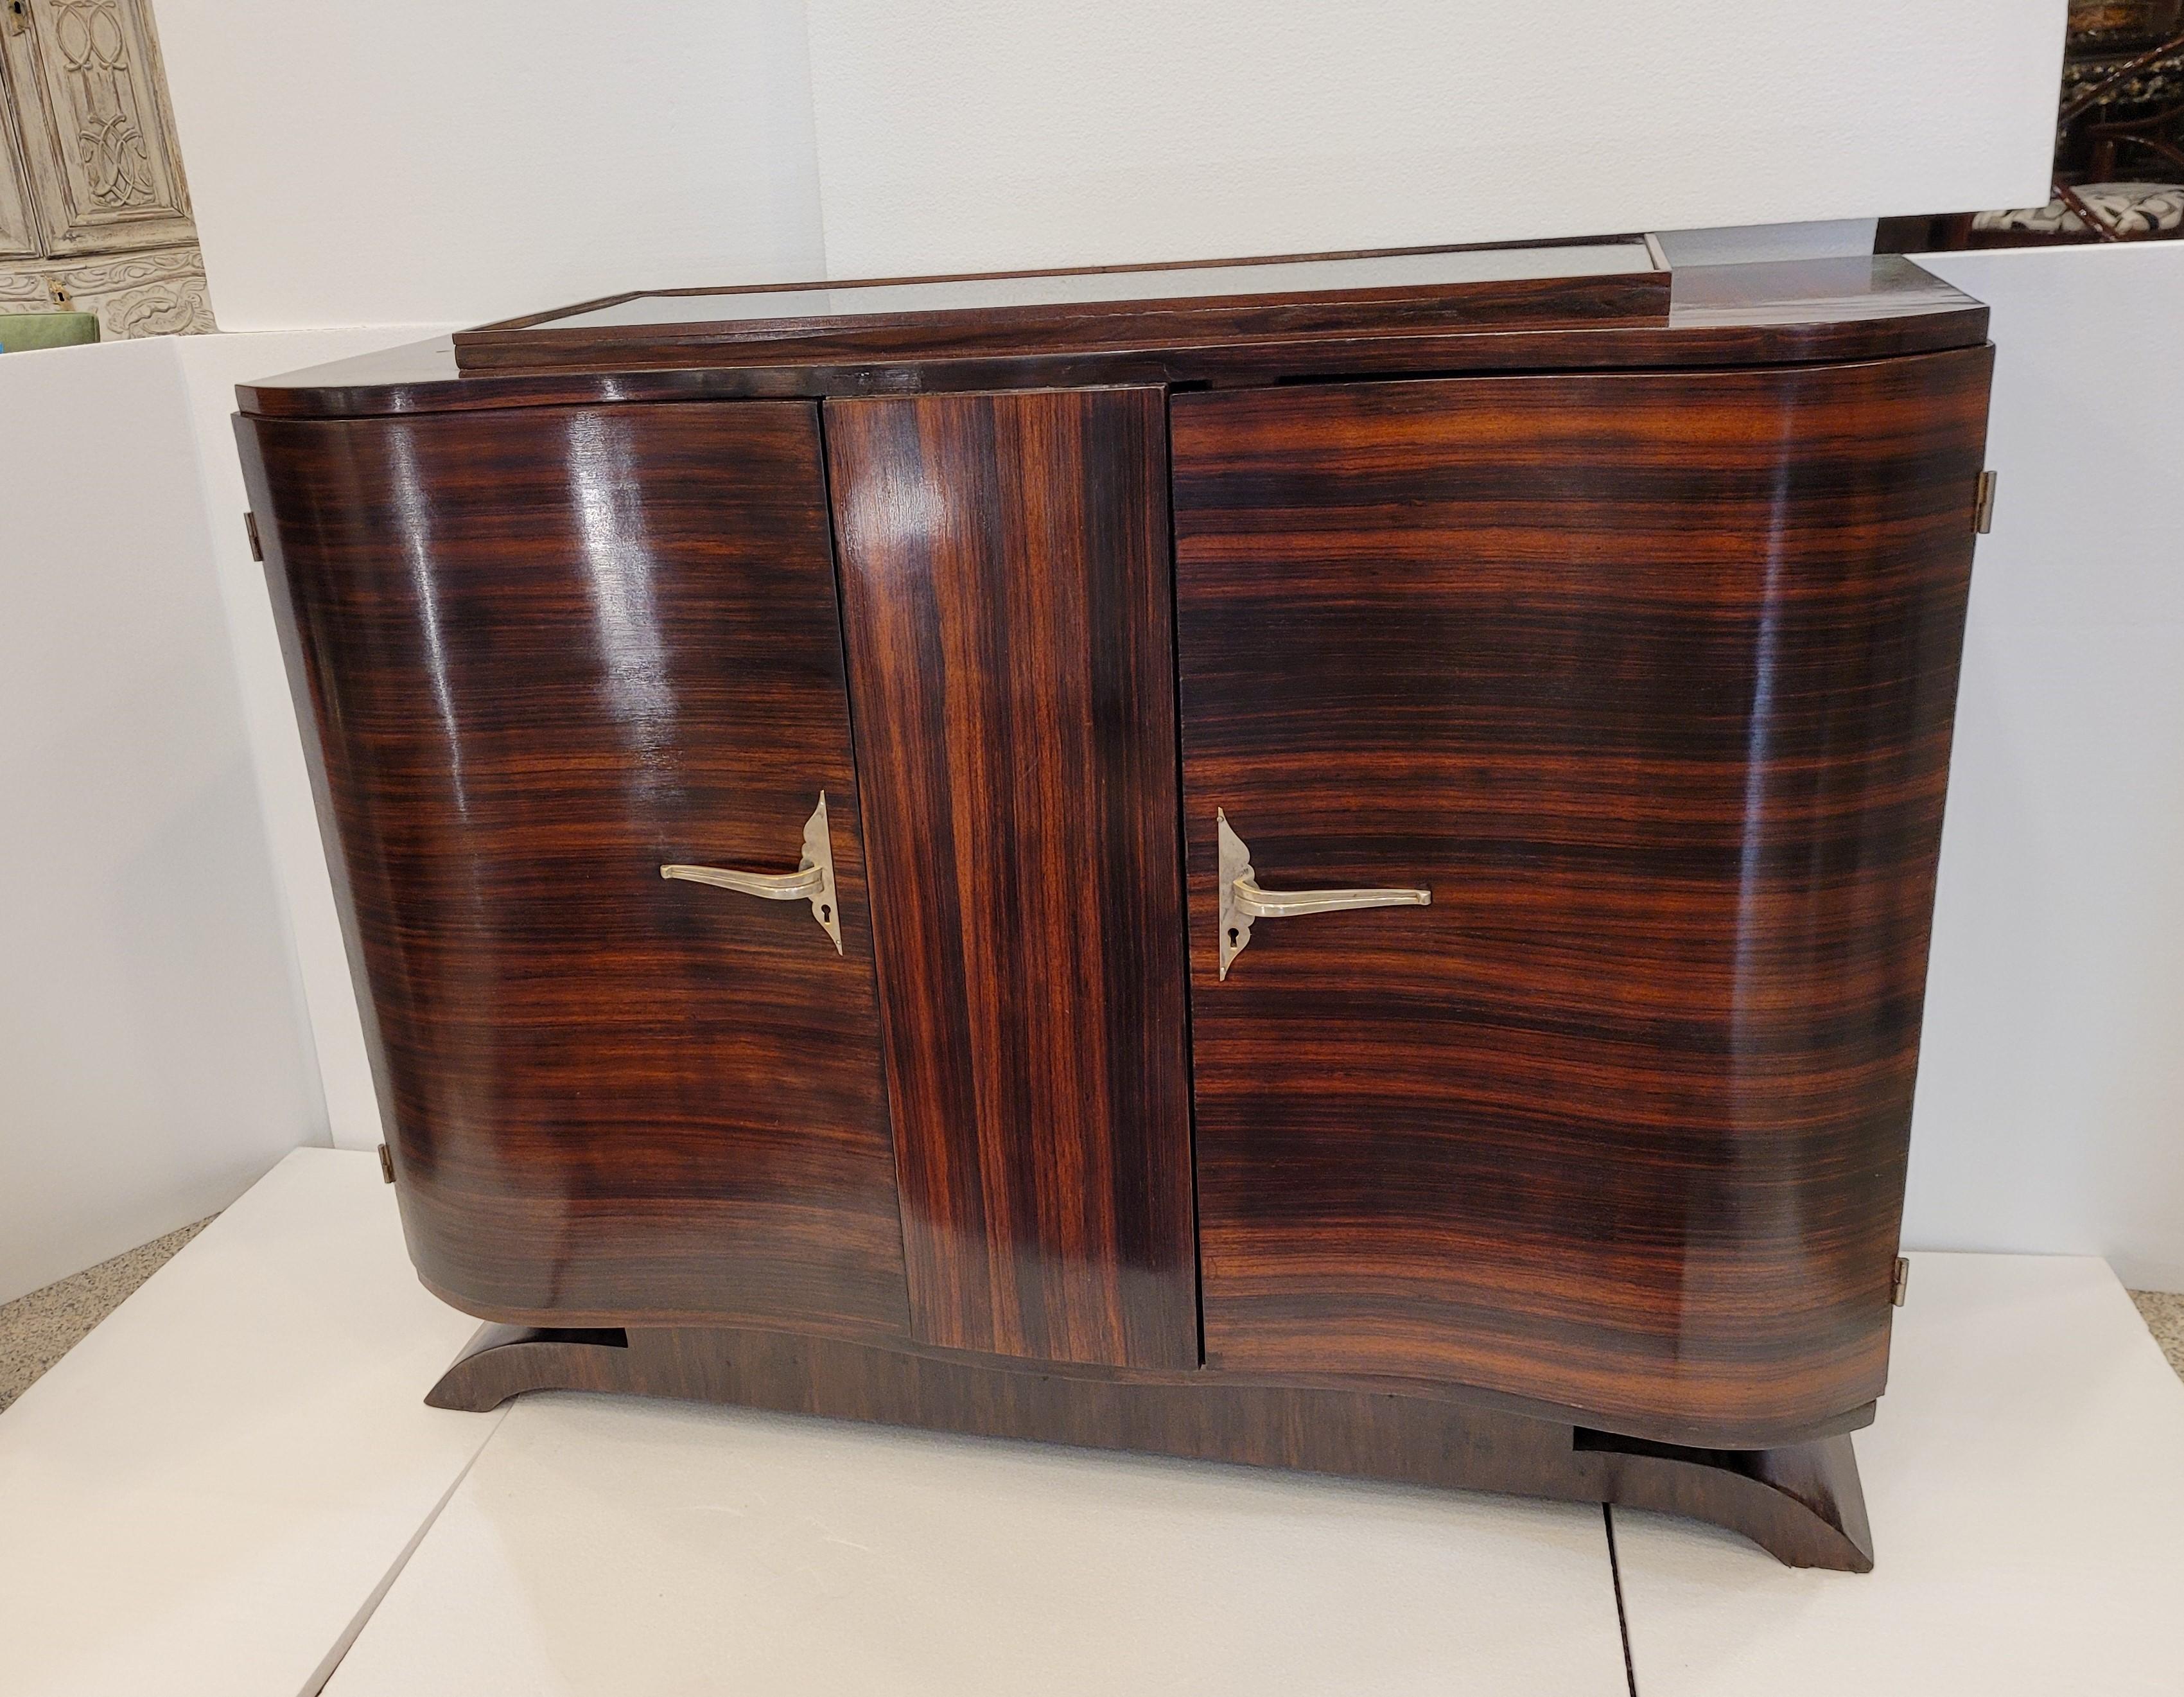 Amazing French chest of drawers made of precious wood, in an elegant veined reddish tone, original from the first half of the 40s of the 20th century. Characteristic design of Art Déco, with pure lines that tend towards geometrization, in this case